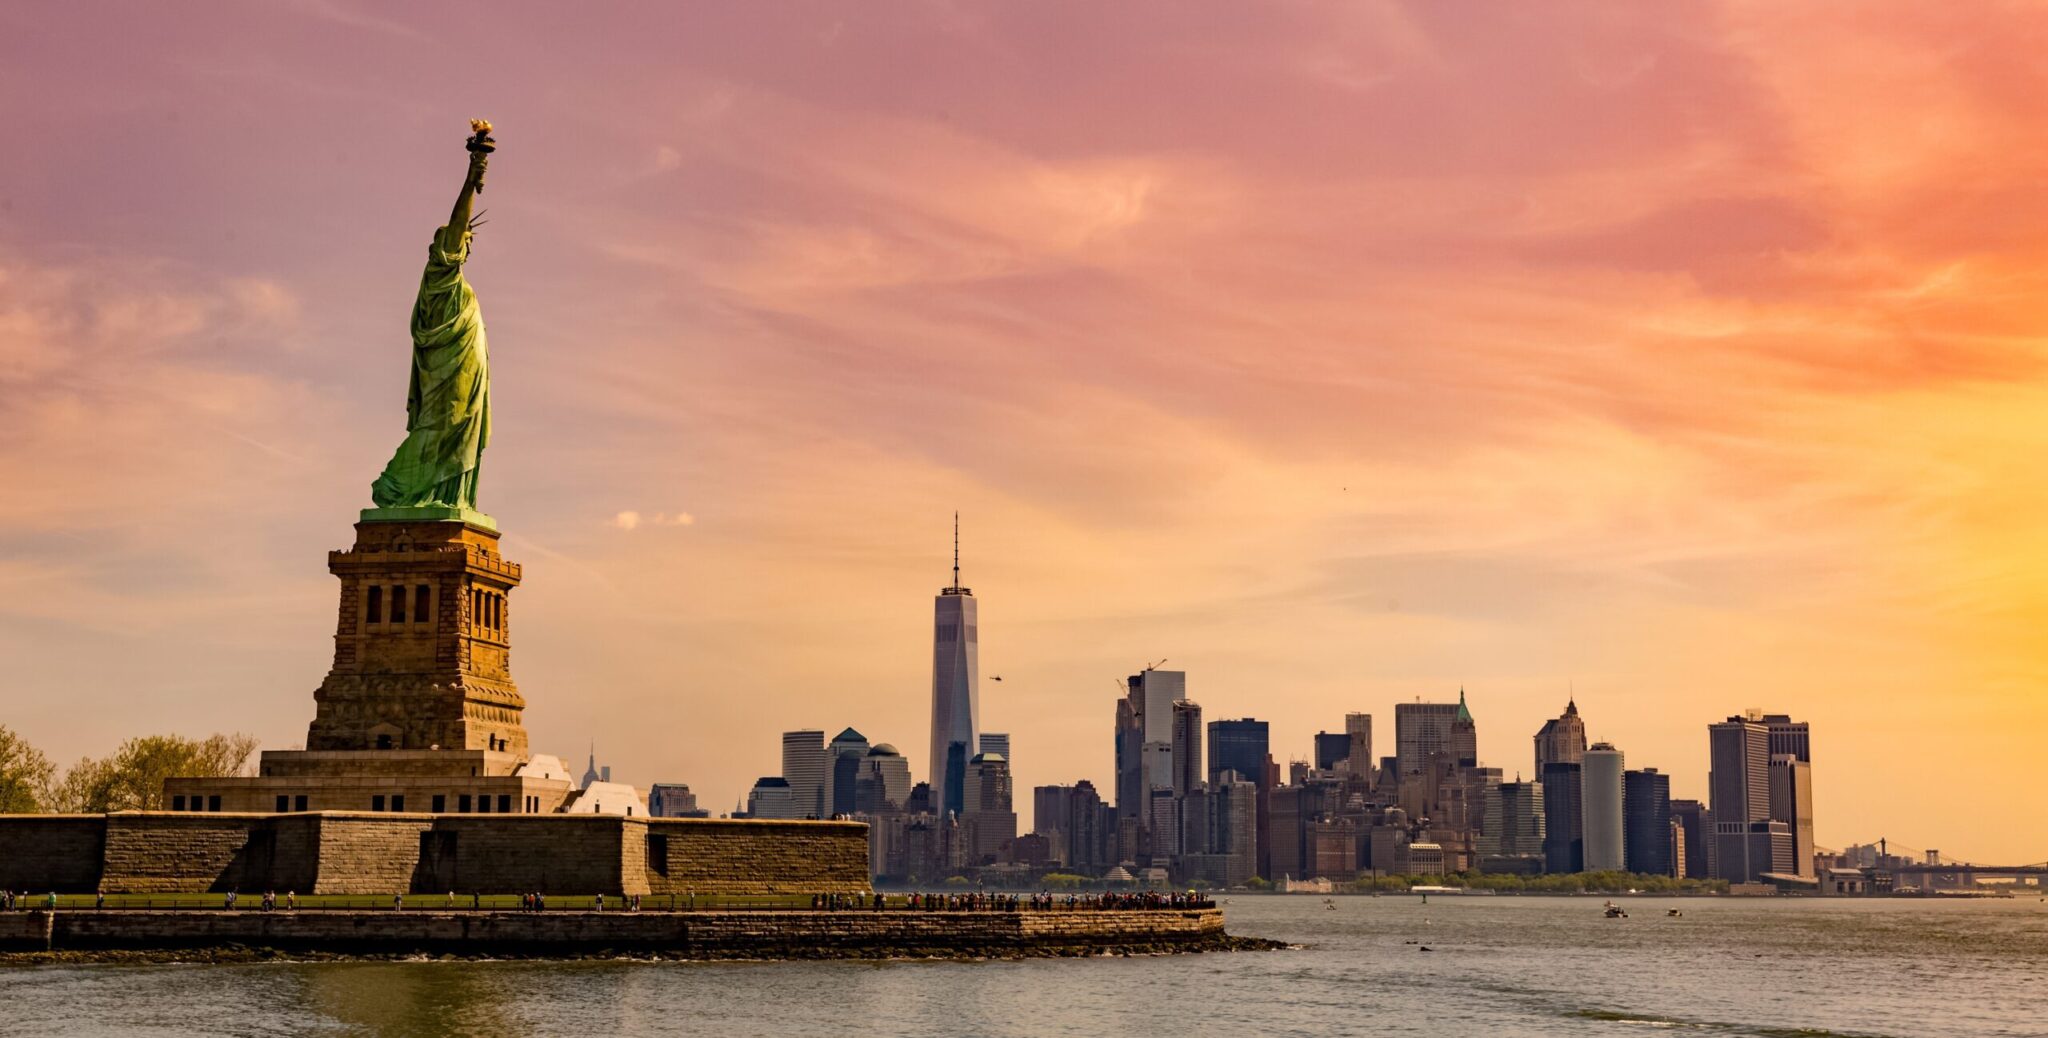 A beautiful picture of a statue of liberty national monument under the mesmerizing sunset in New York City, USA